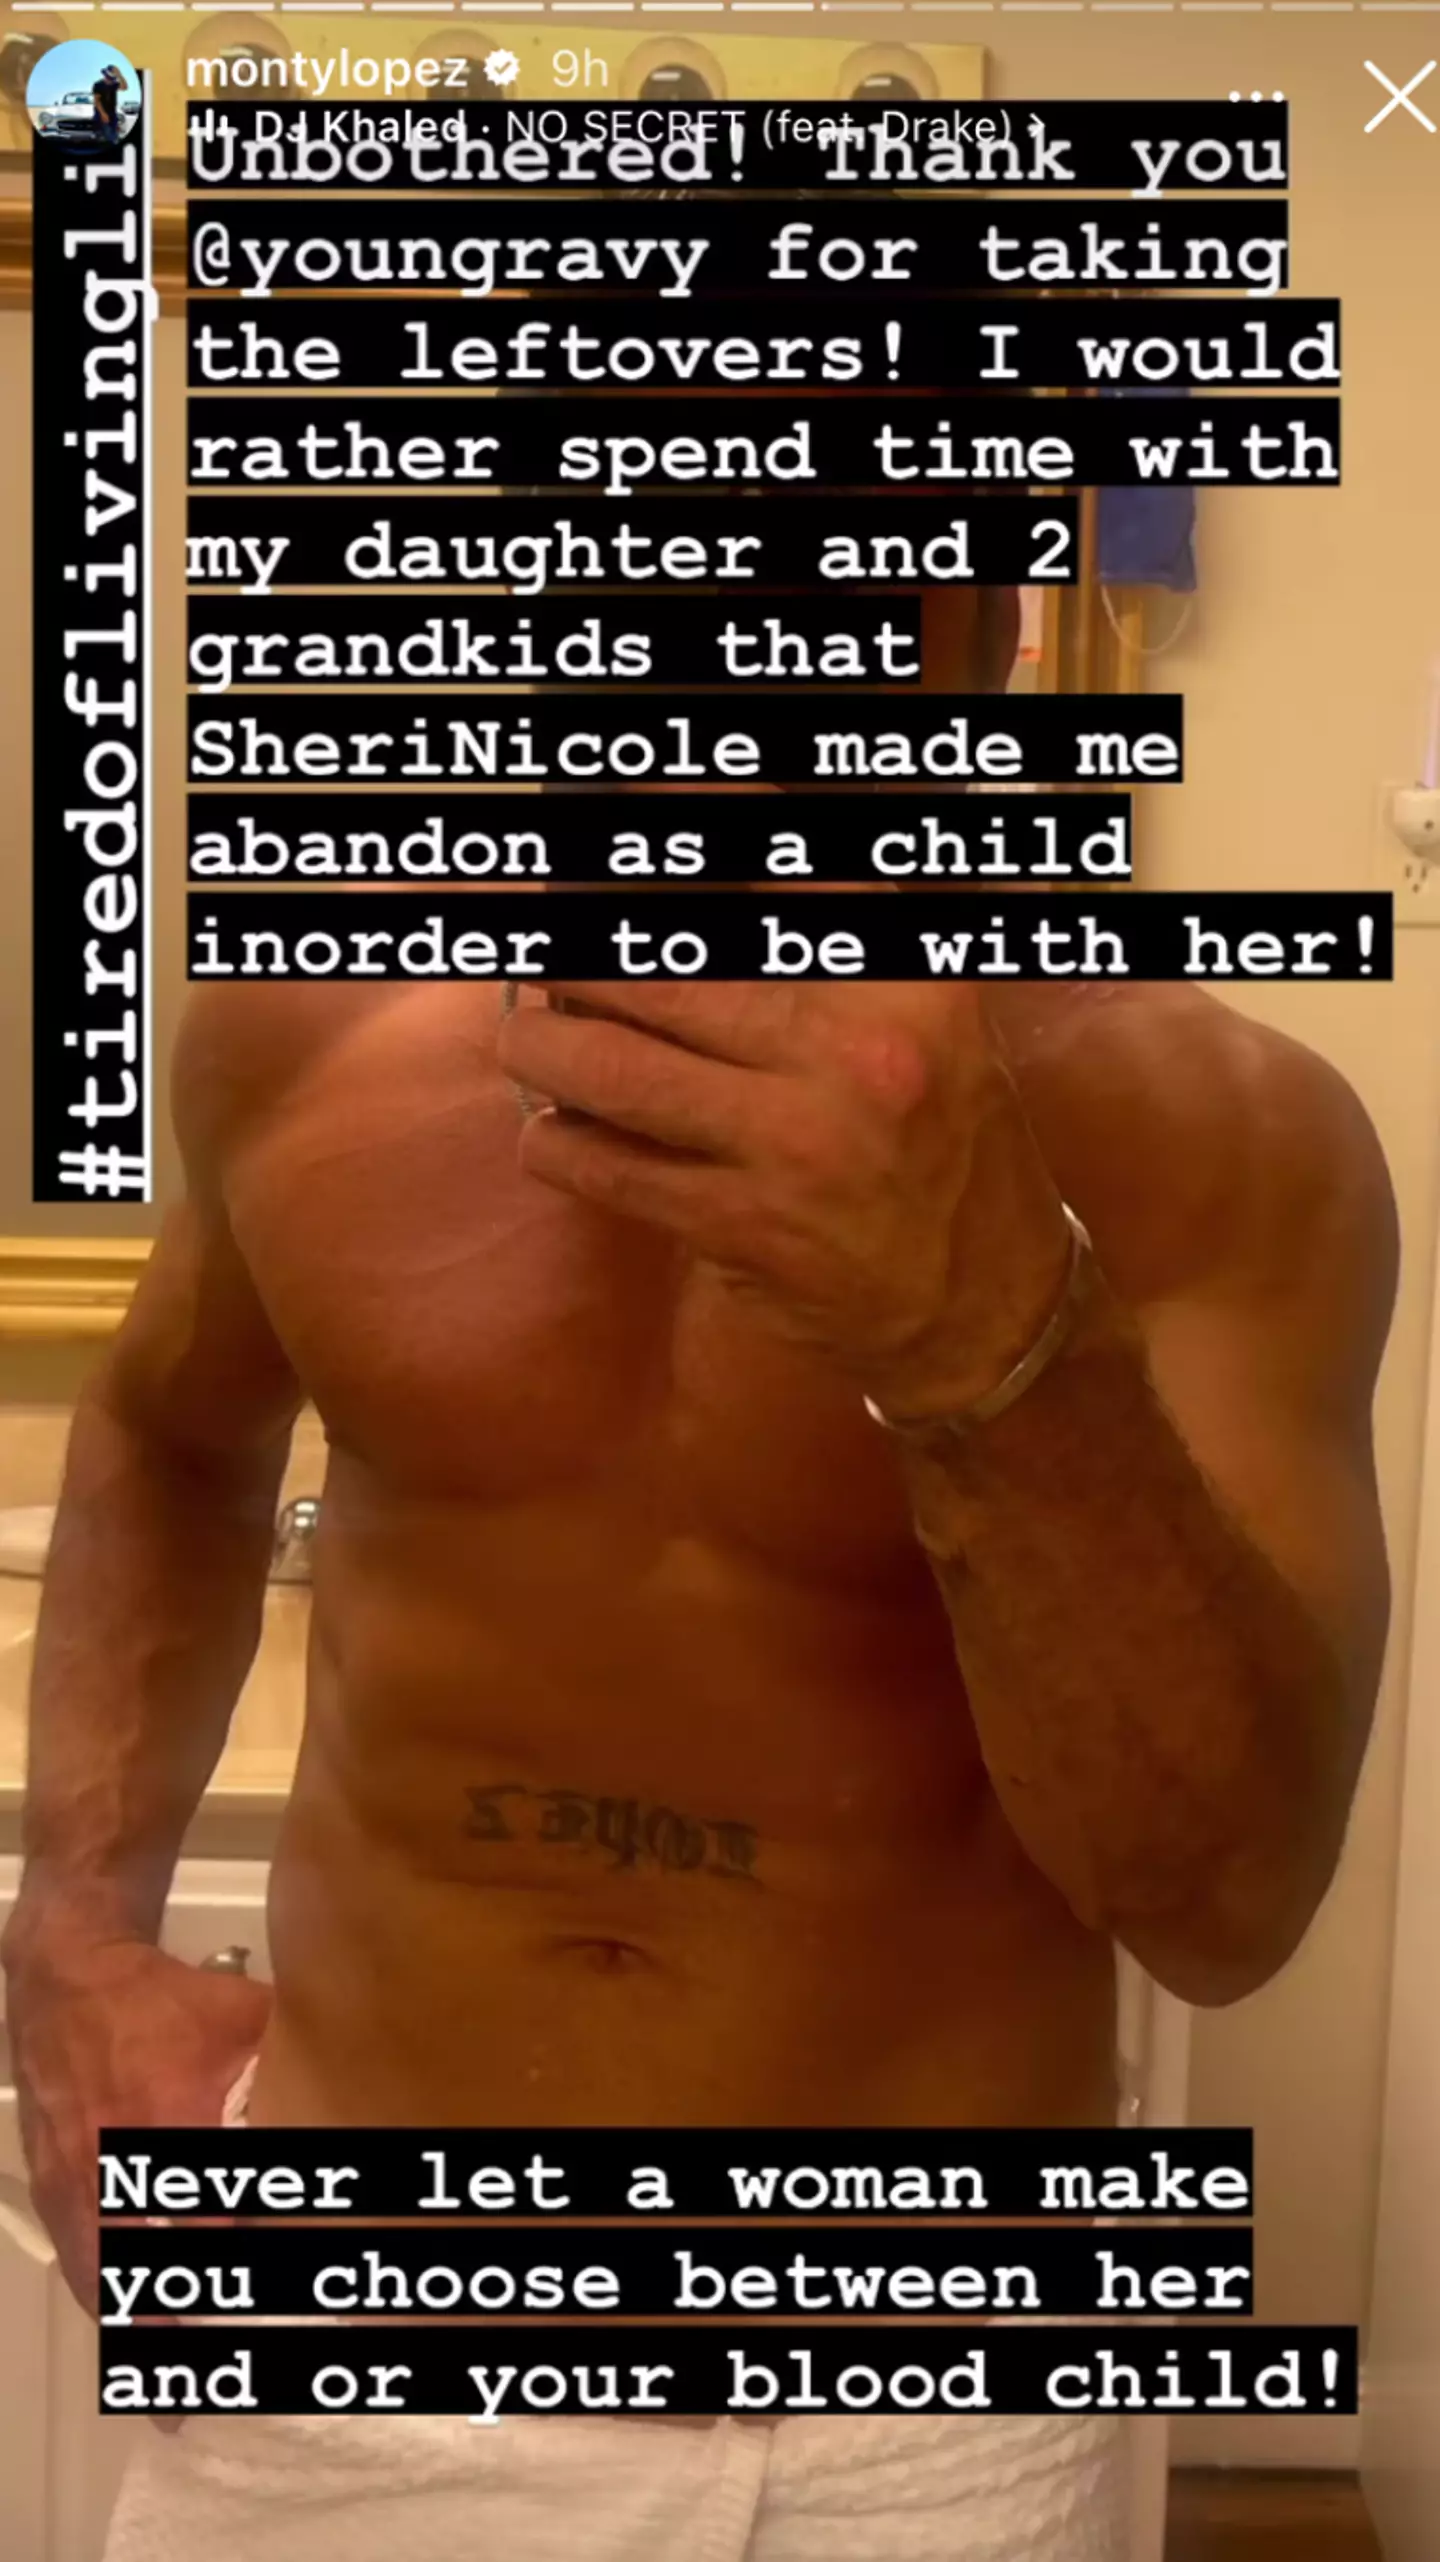 Addison Rae’s dad Monty Lopez has posted a scathing response on Instagram.